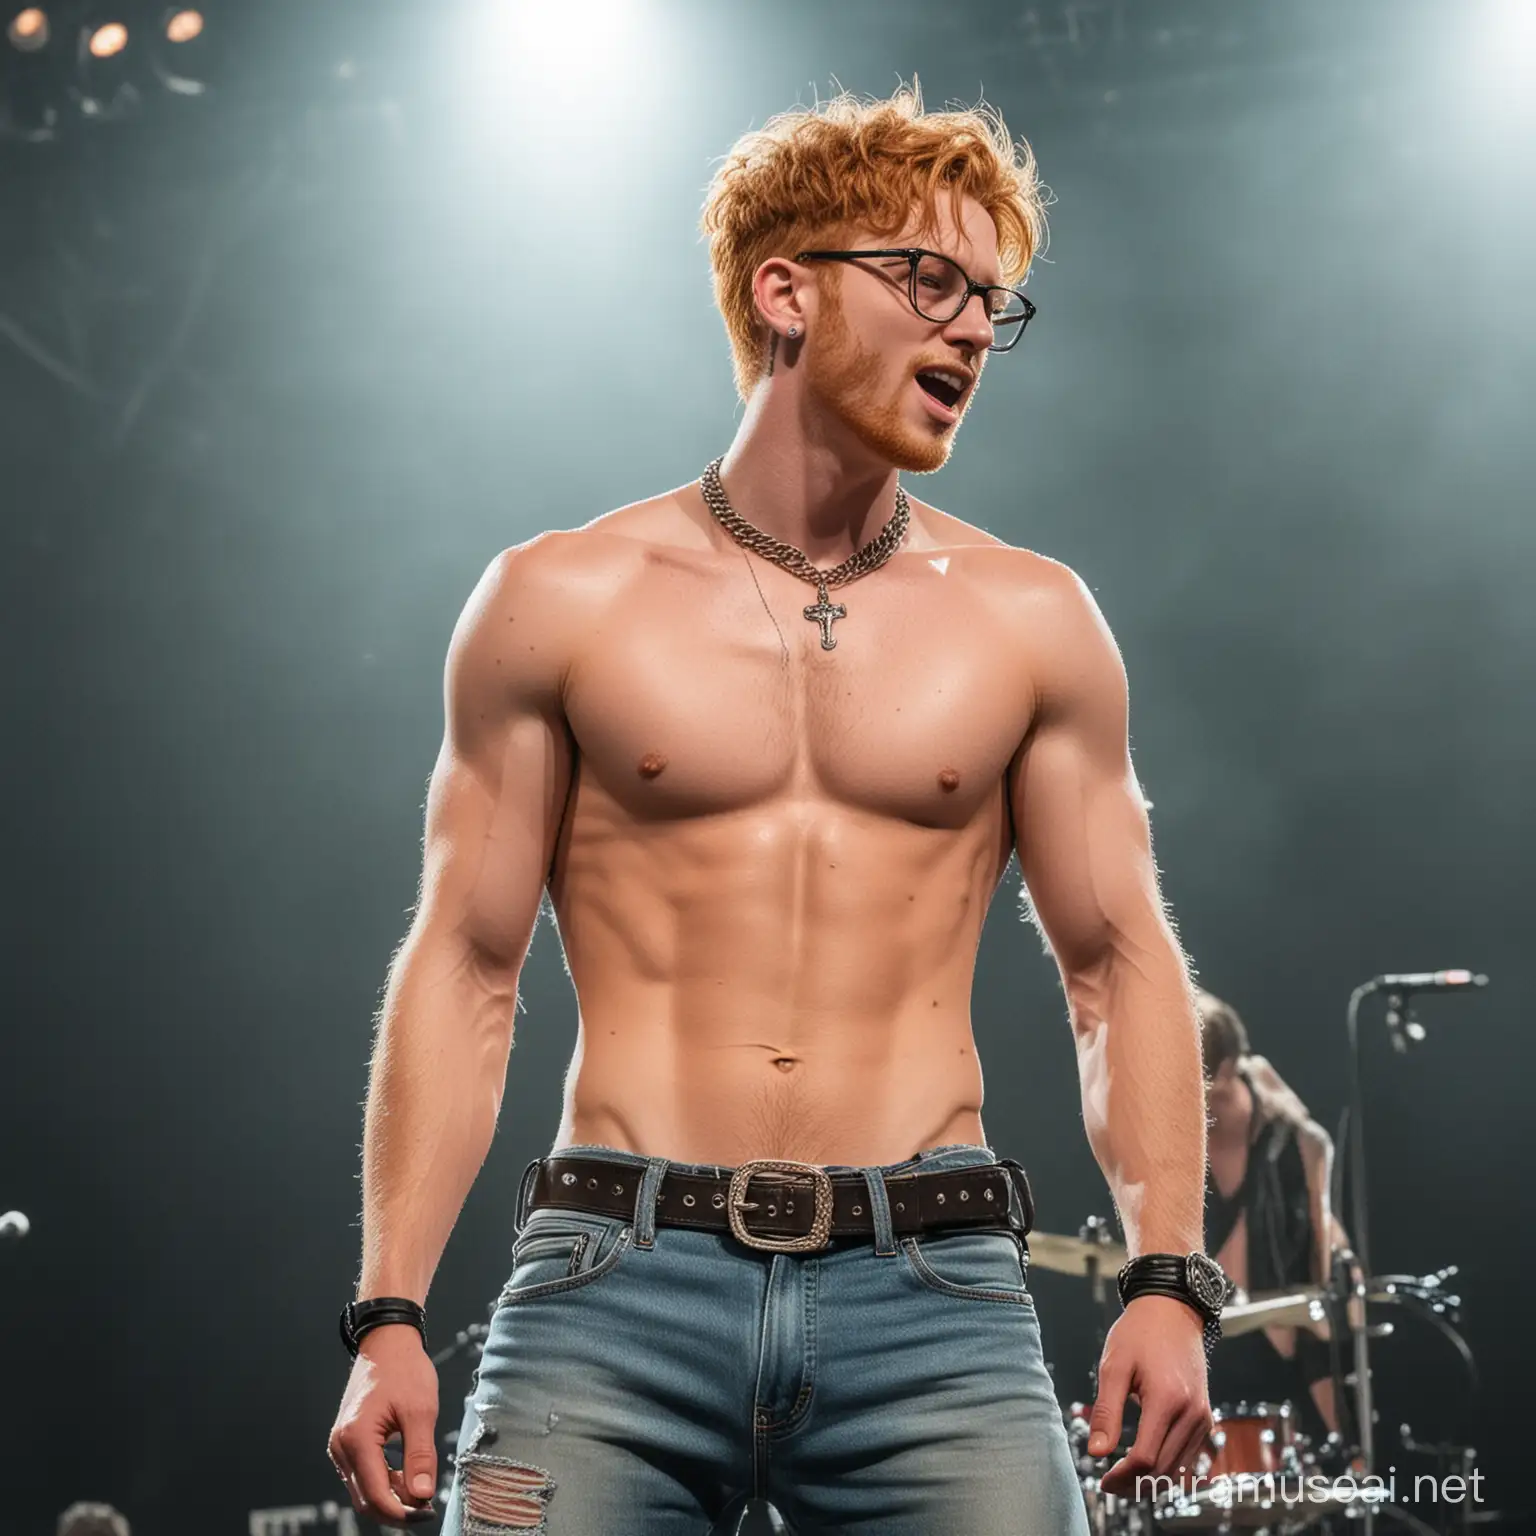 handsome shirtless vocalists, concert, sweaty, boots, jeans, necklace, watch, bracelet, short hair, show very hairy chest, seductive, belt buckle, seductive, mic stand, ginger, glasses, slender